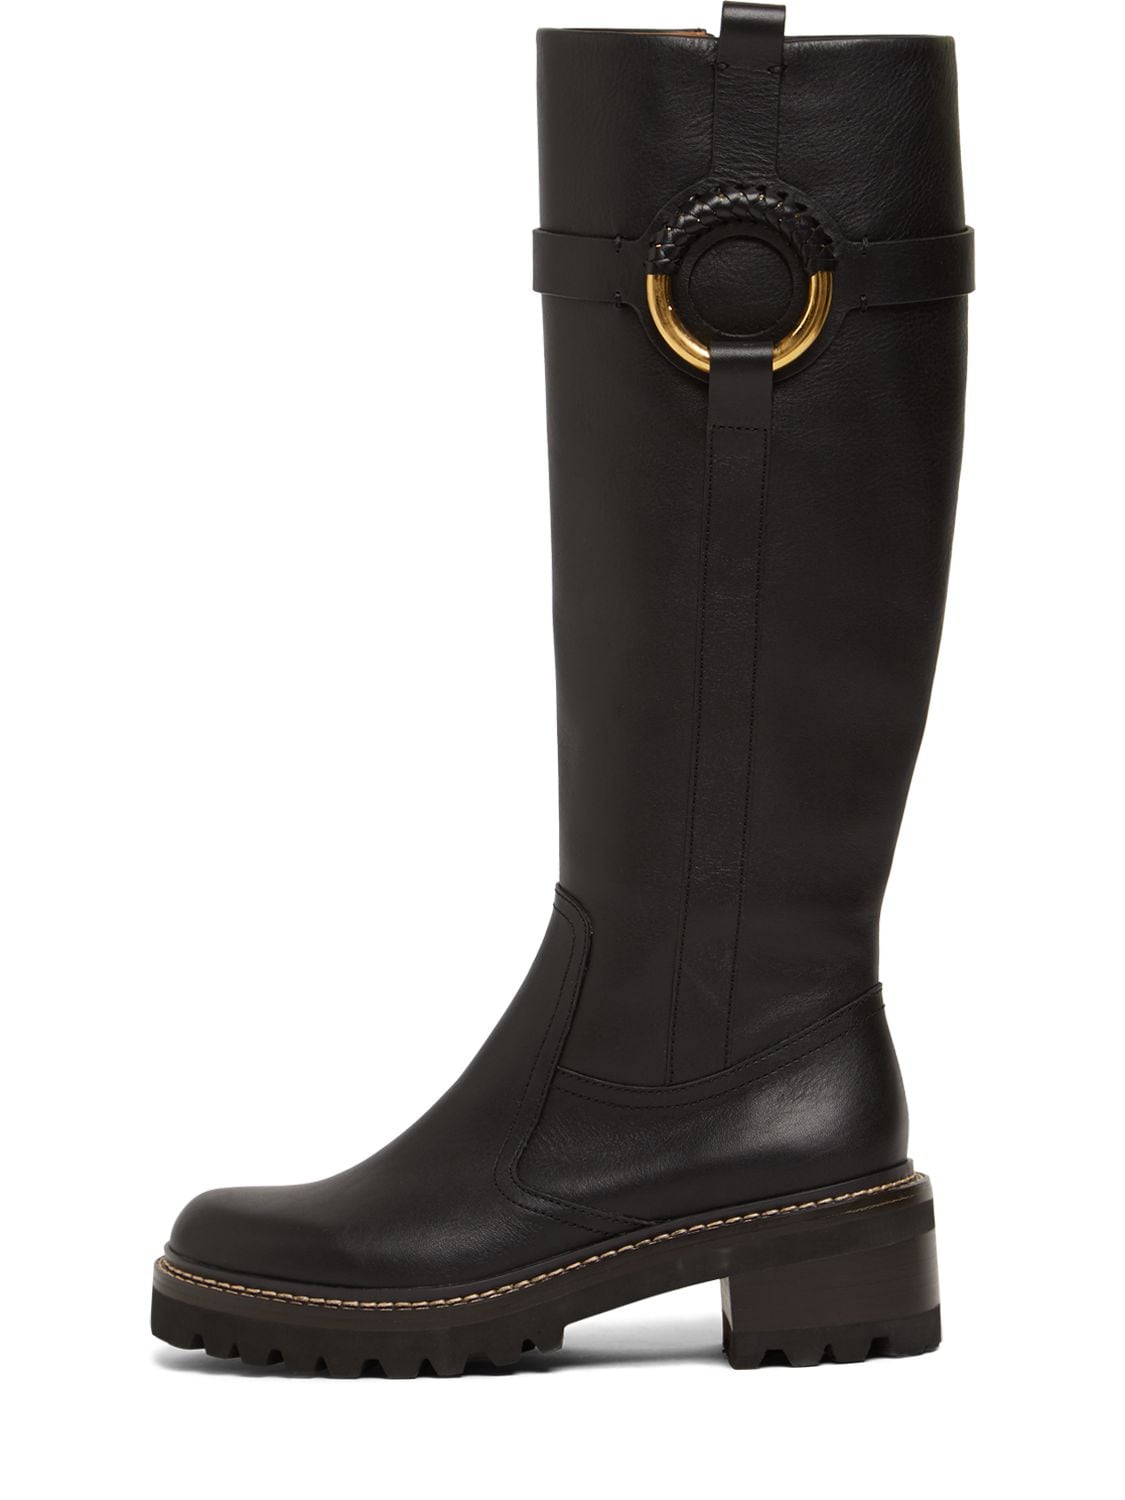 SEE BY CHLOÉ 45MM HANA LEATHER TALL BOOTS